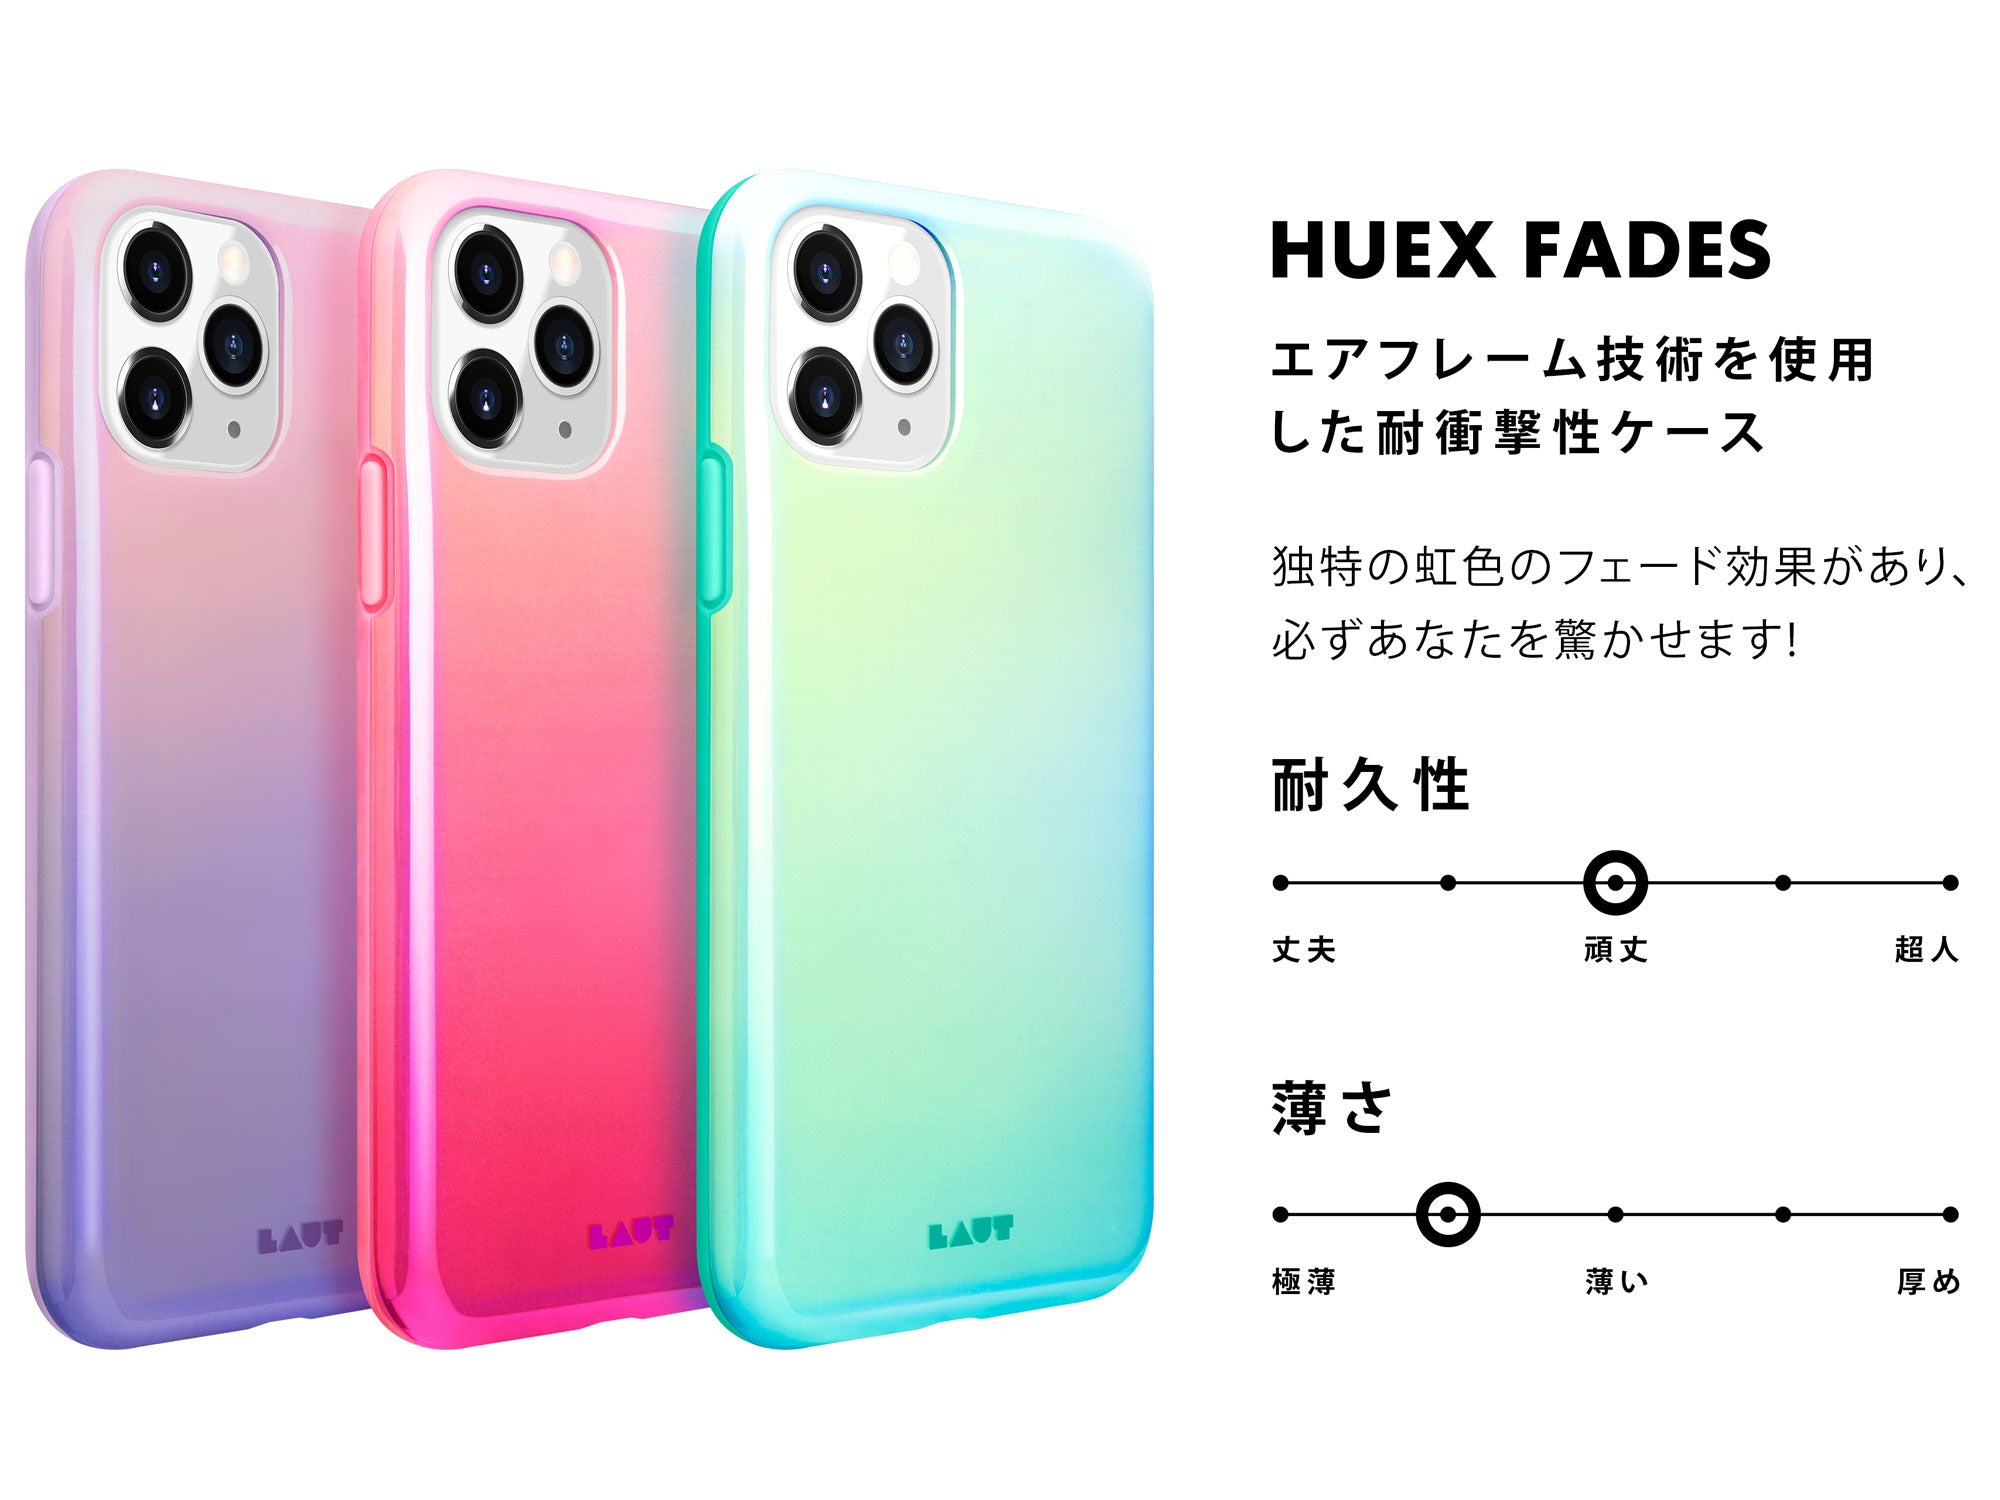 LAUT HUEX FADES for iPhone 11 | iPhone 11 Pro | iPhone 11 Pro Max